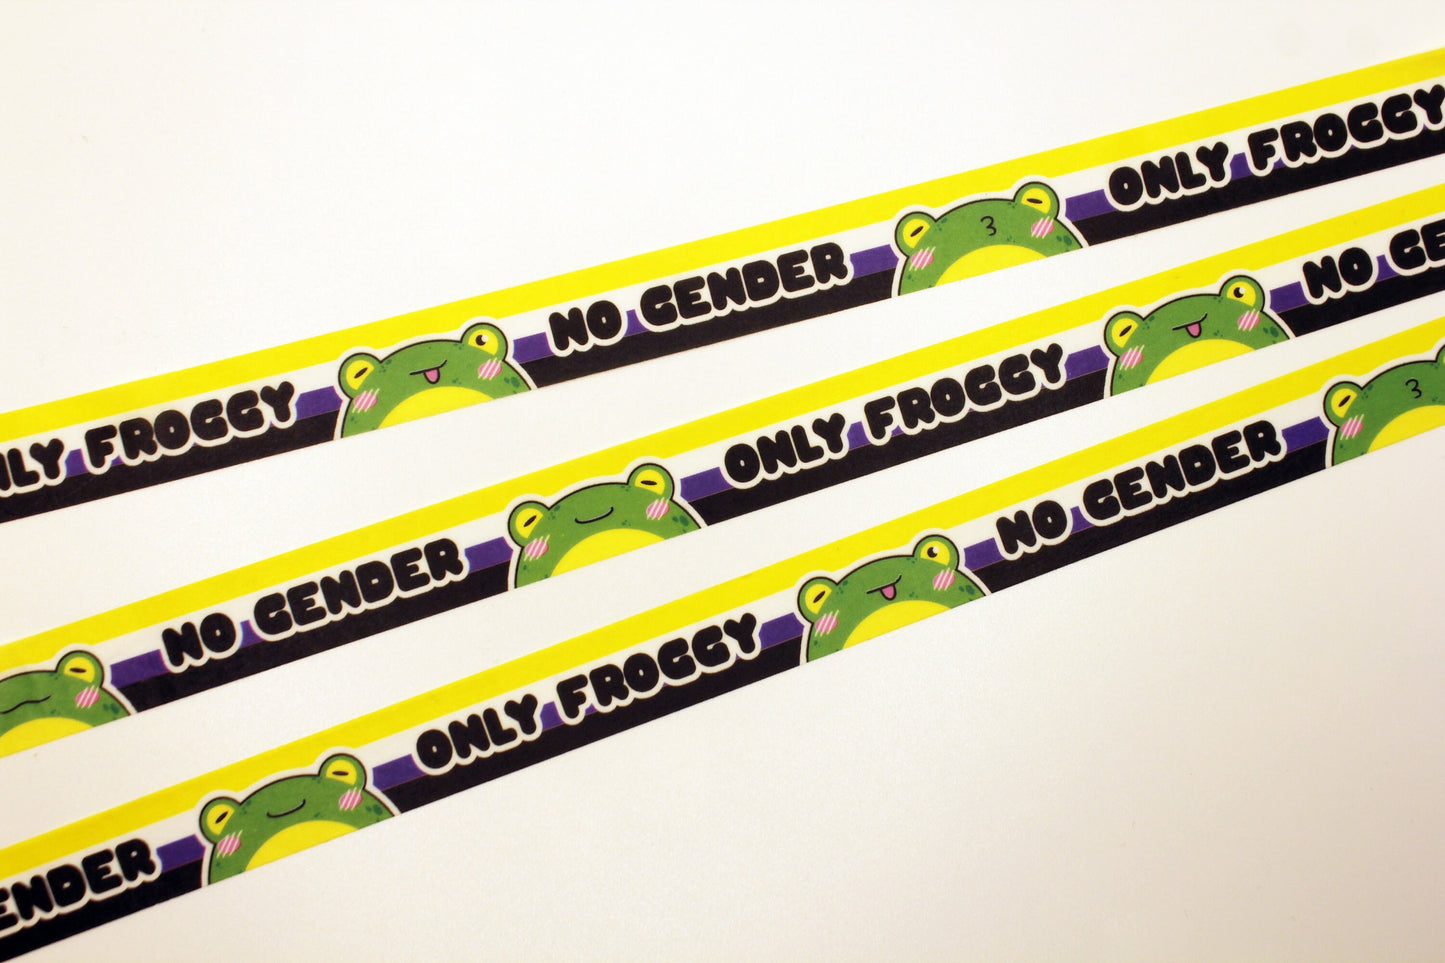 No Gender Only Froggy Washi Tape 1.5cm x 10m